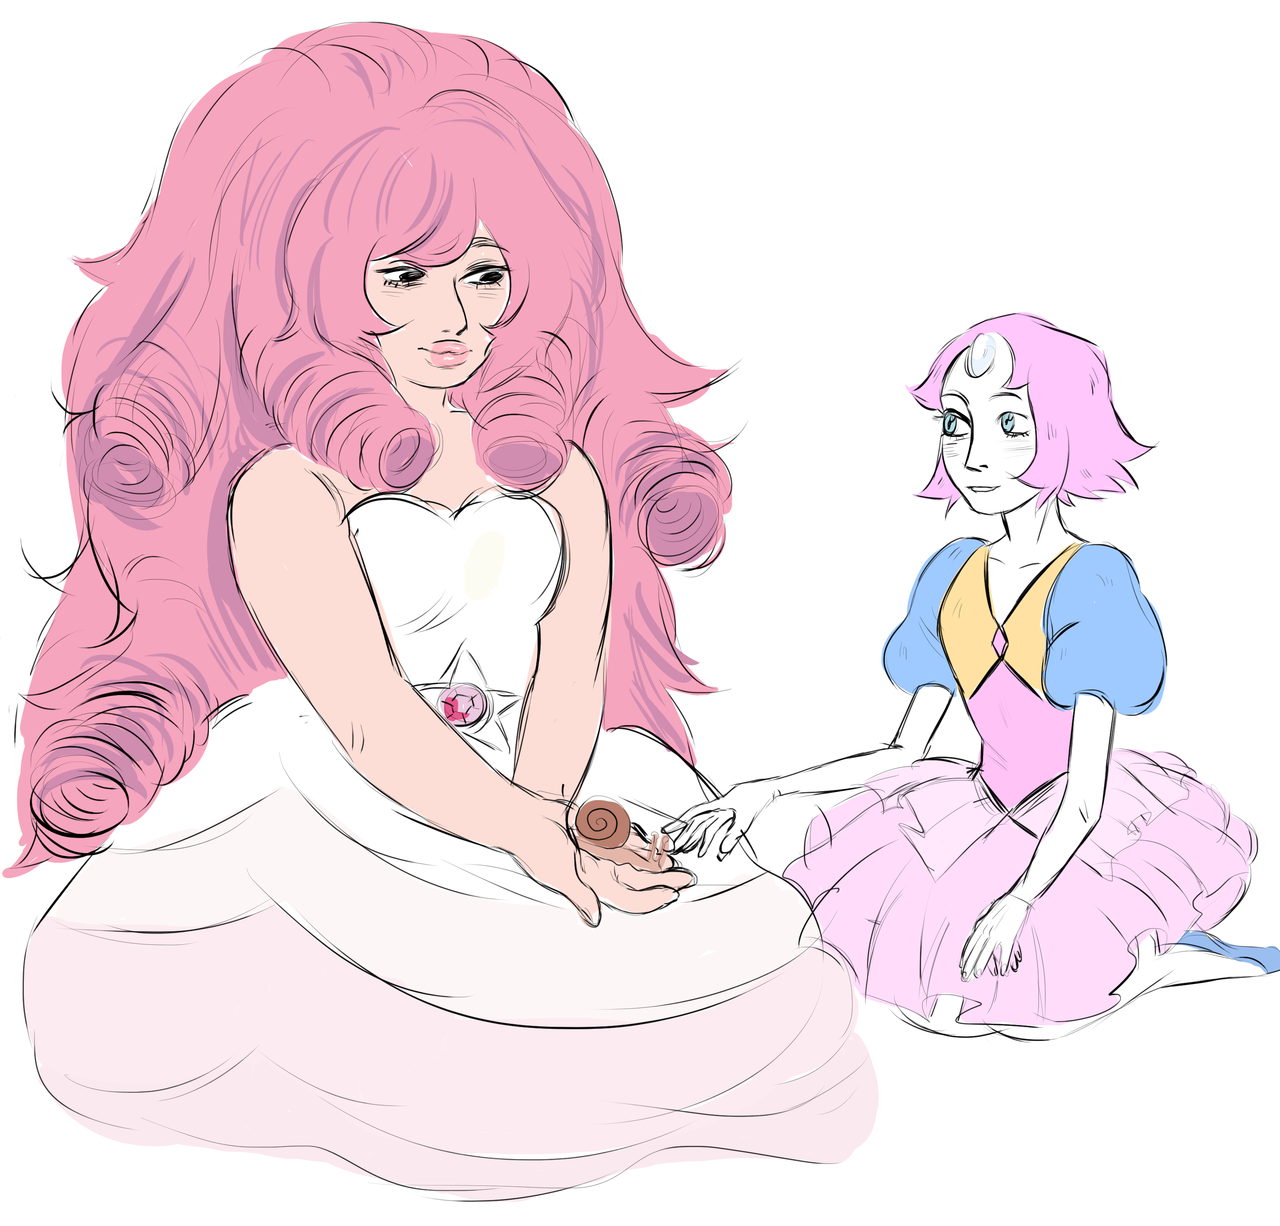 an opal, rose and homeworld pearl? (dont tag as kin/id/me pls)